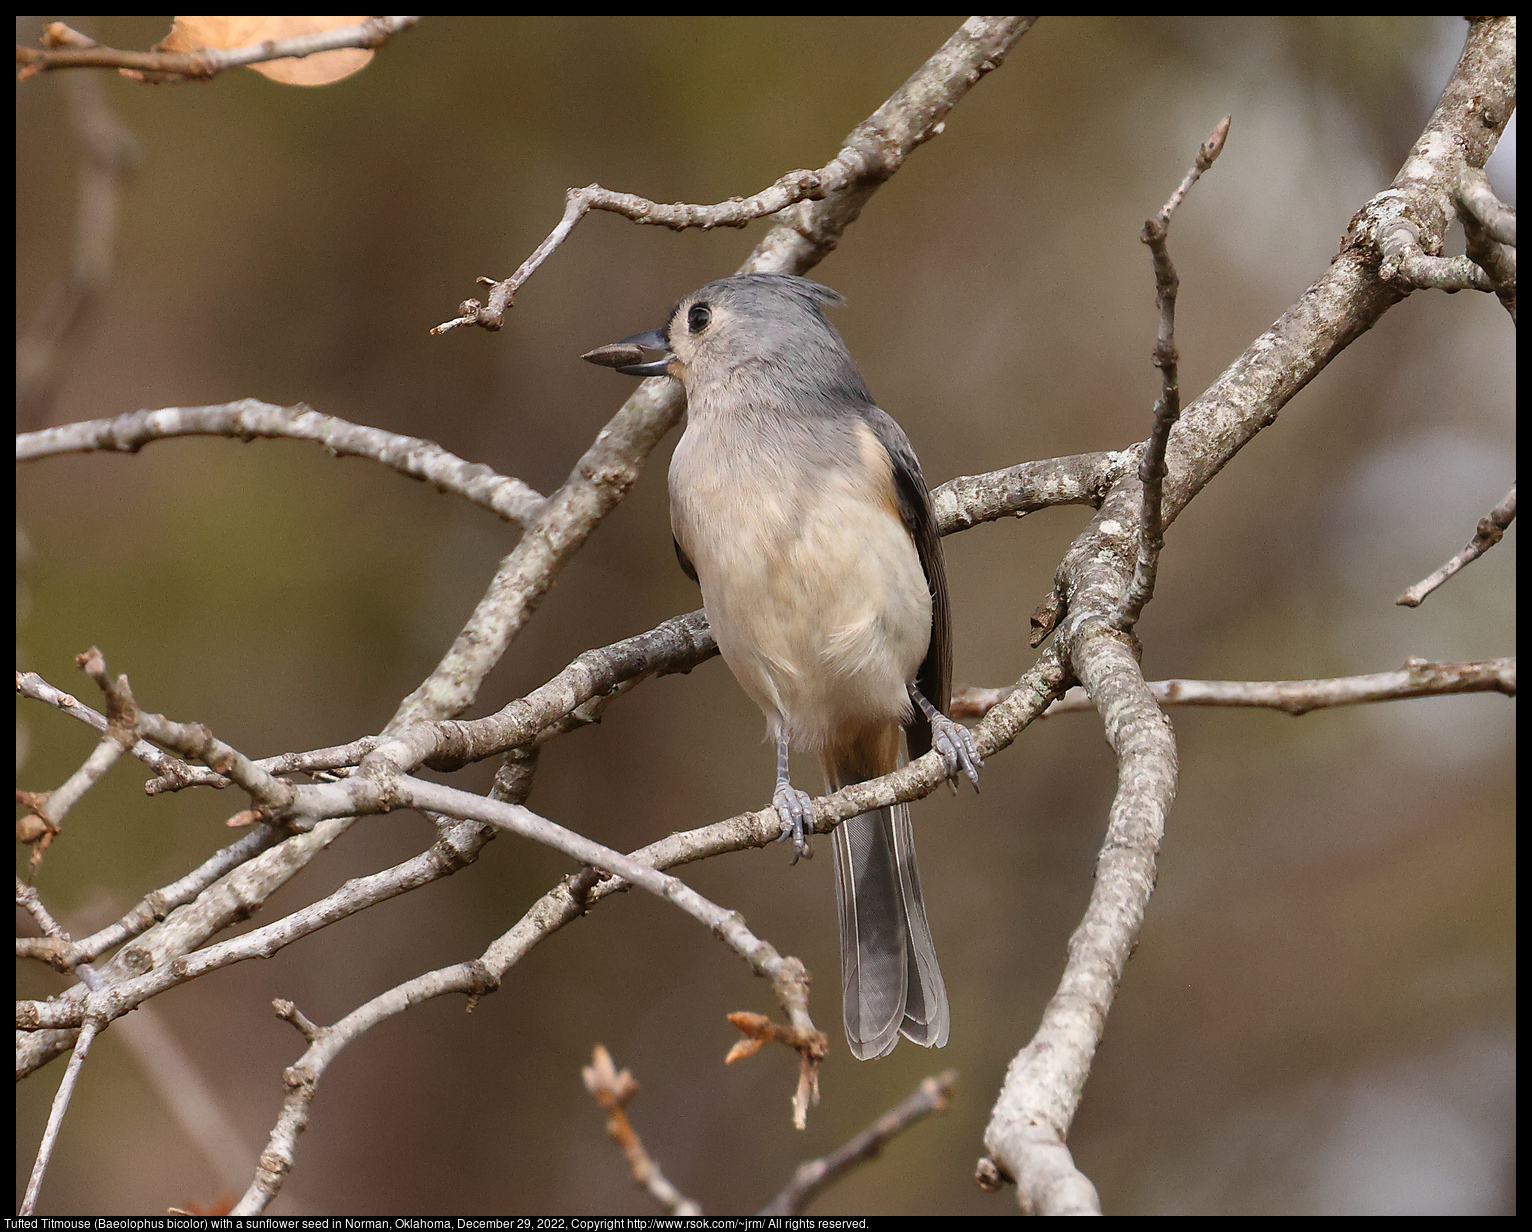 Tufted Titmouse (Baeolophus bicolor) with a sunflower seed in Norman, Oklahoma, December 29, 2022